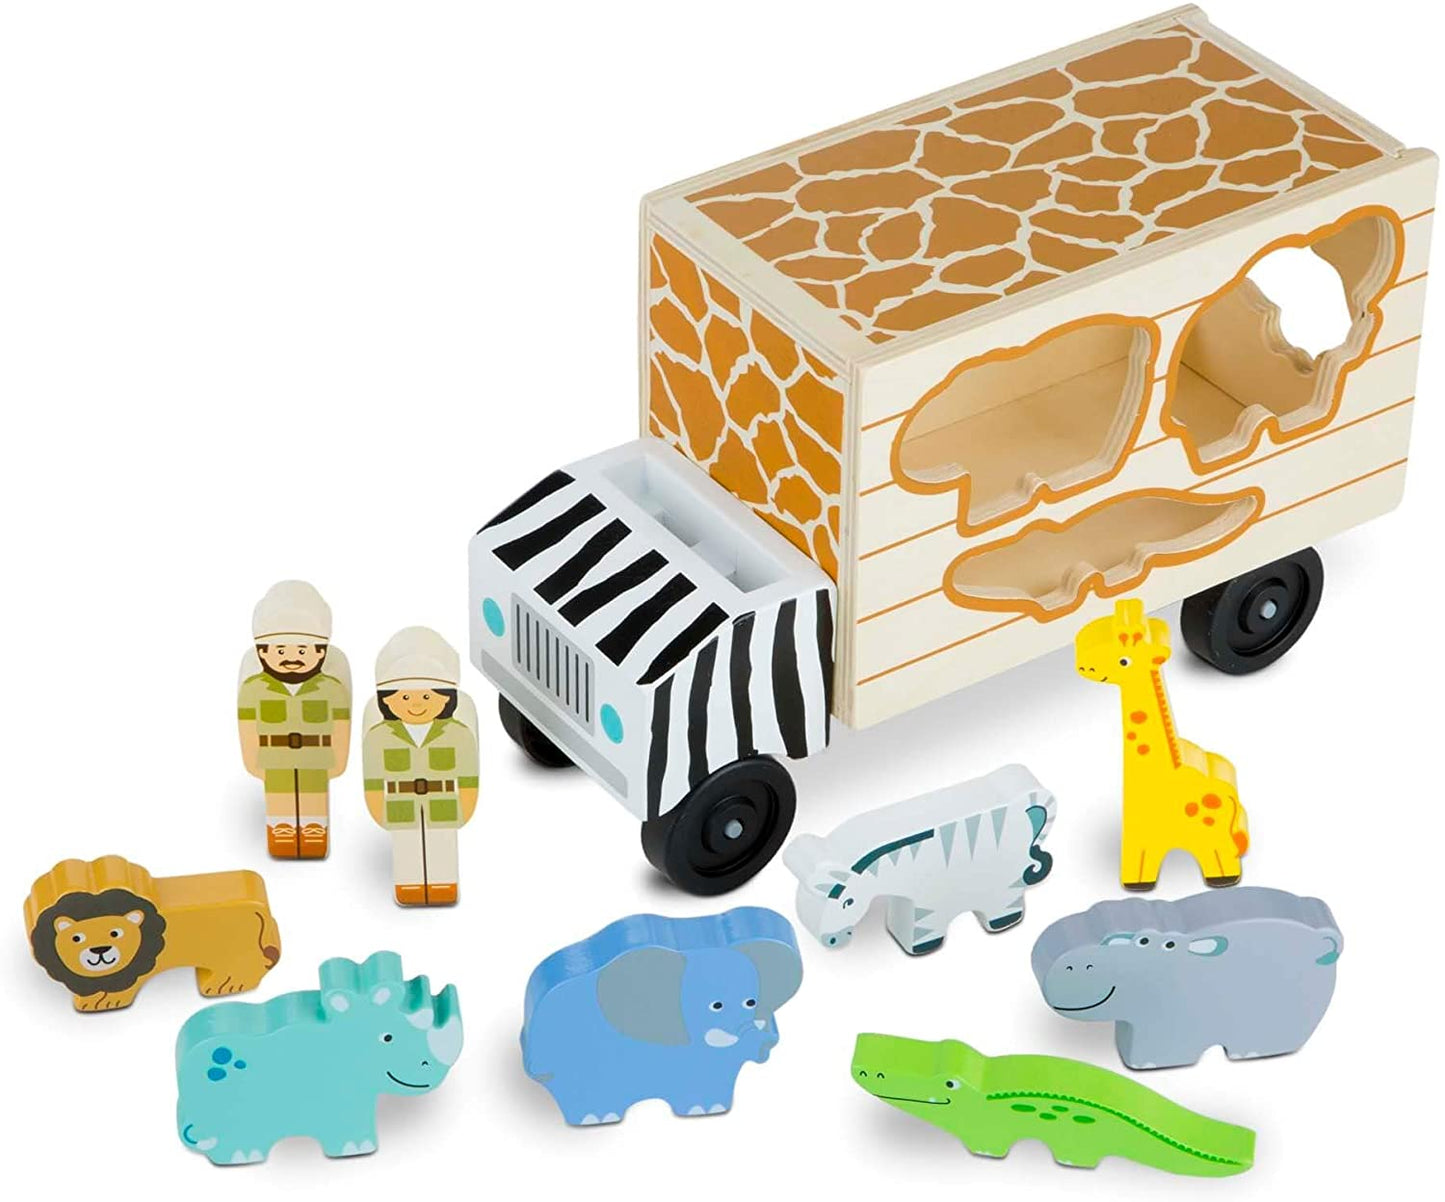 Melissa & Doug Animal Rescue Shape-Sorting Truck - Wooden Toy with 7 Animals and 2 Play Figures